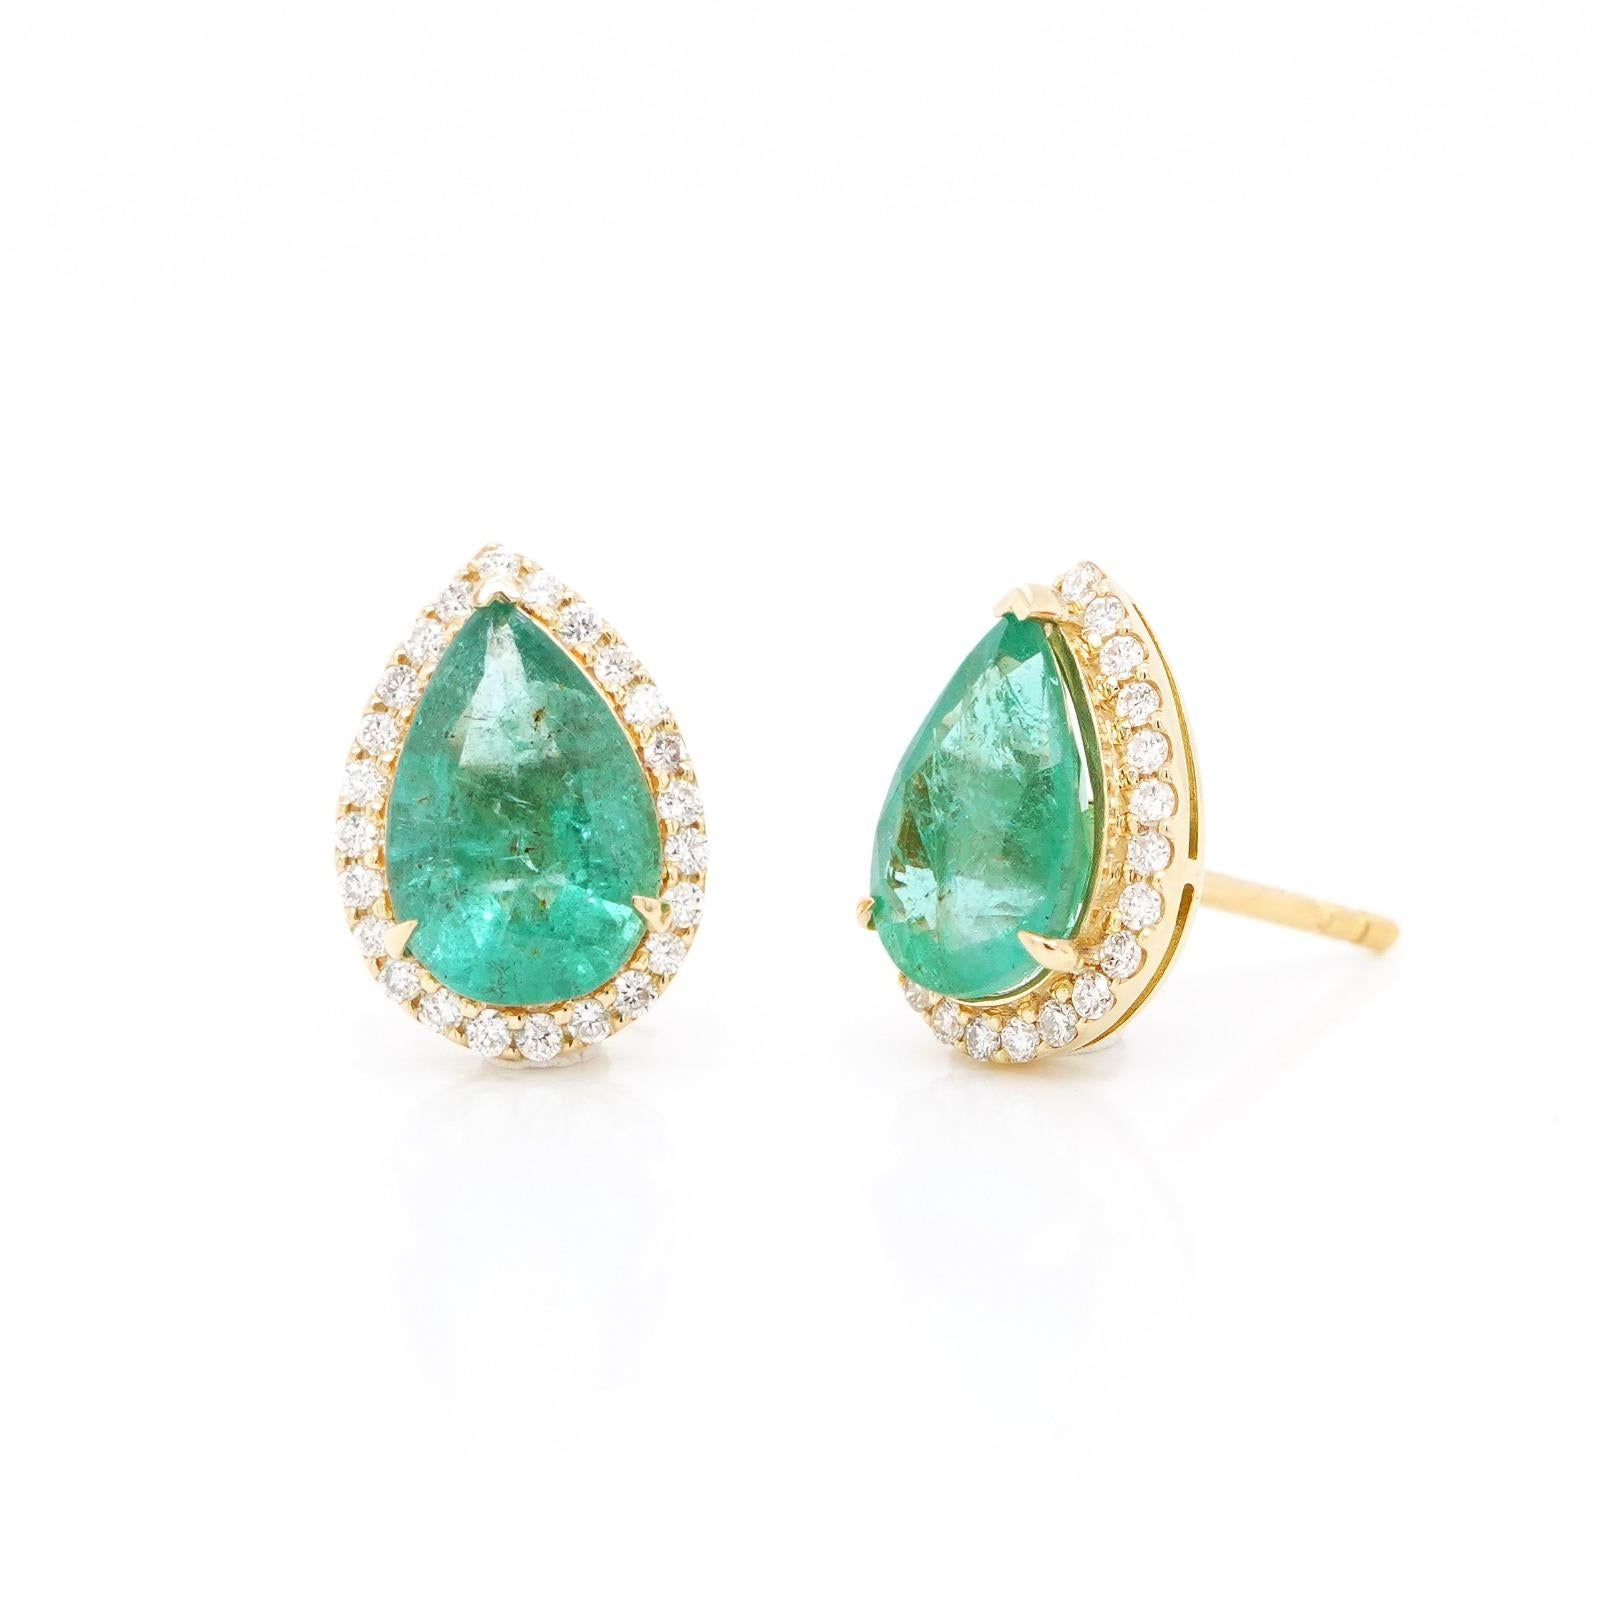 Pear Cut 18K Yellow Gold With Emerald Earrings 5.71 ct. pave setting For Sale